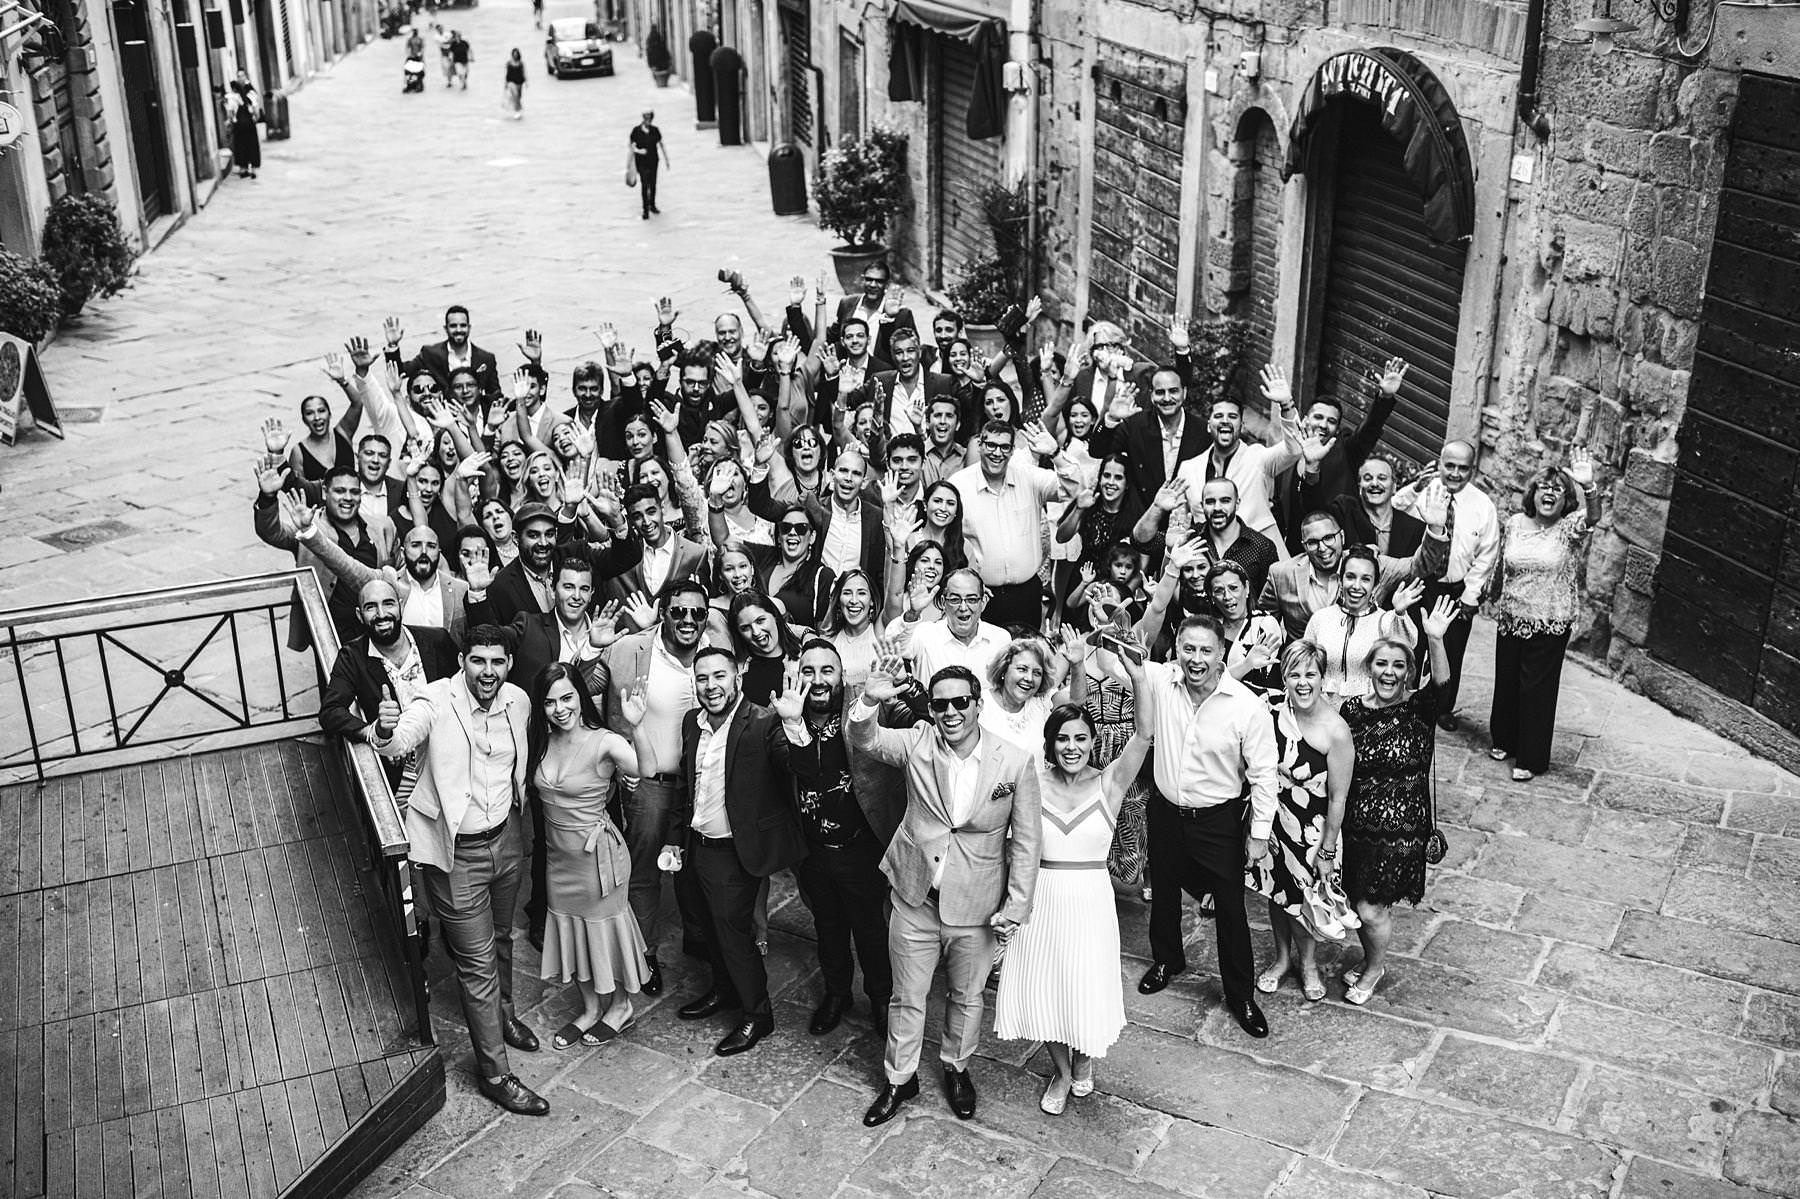 Destination wedding in Tuscany. Bride and groom welcome dinner in Arezzo at Piazza Grande